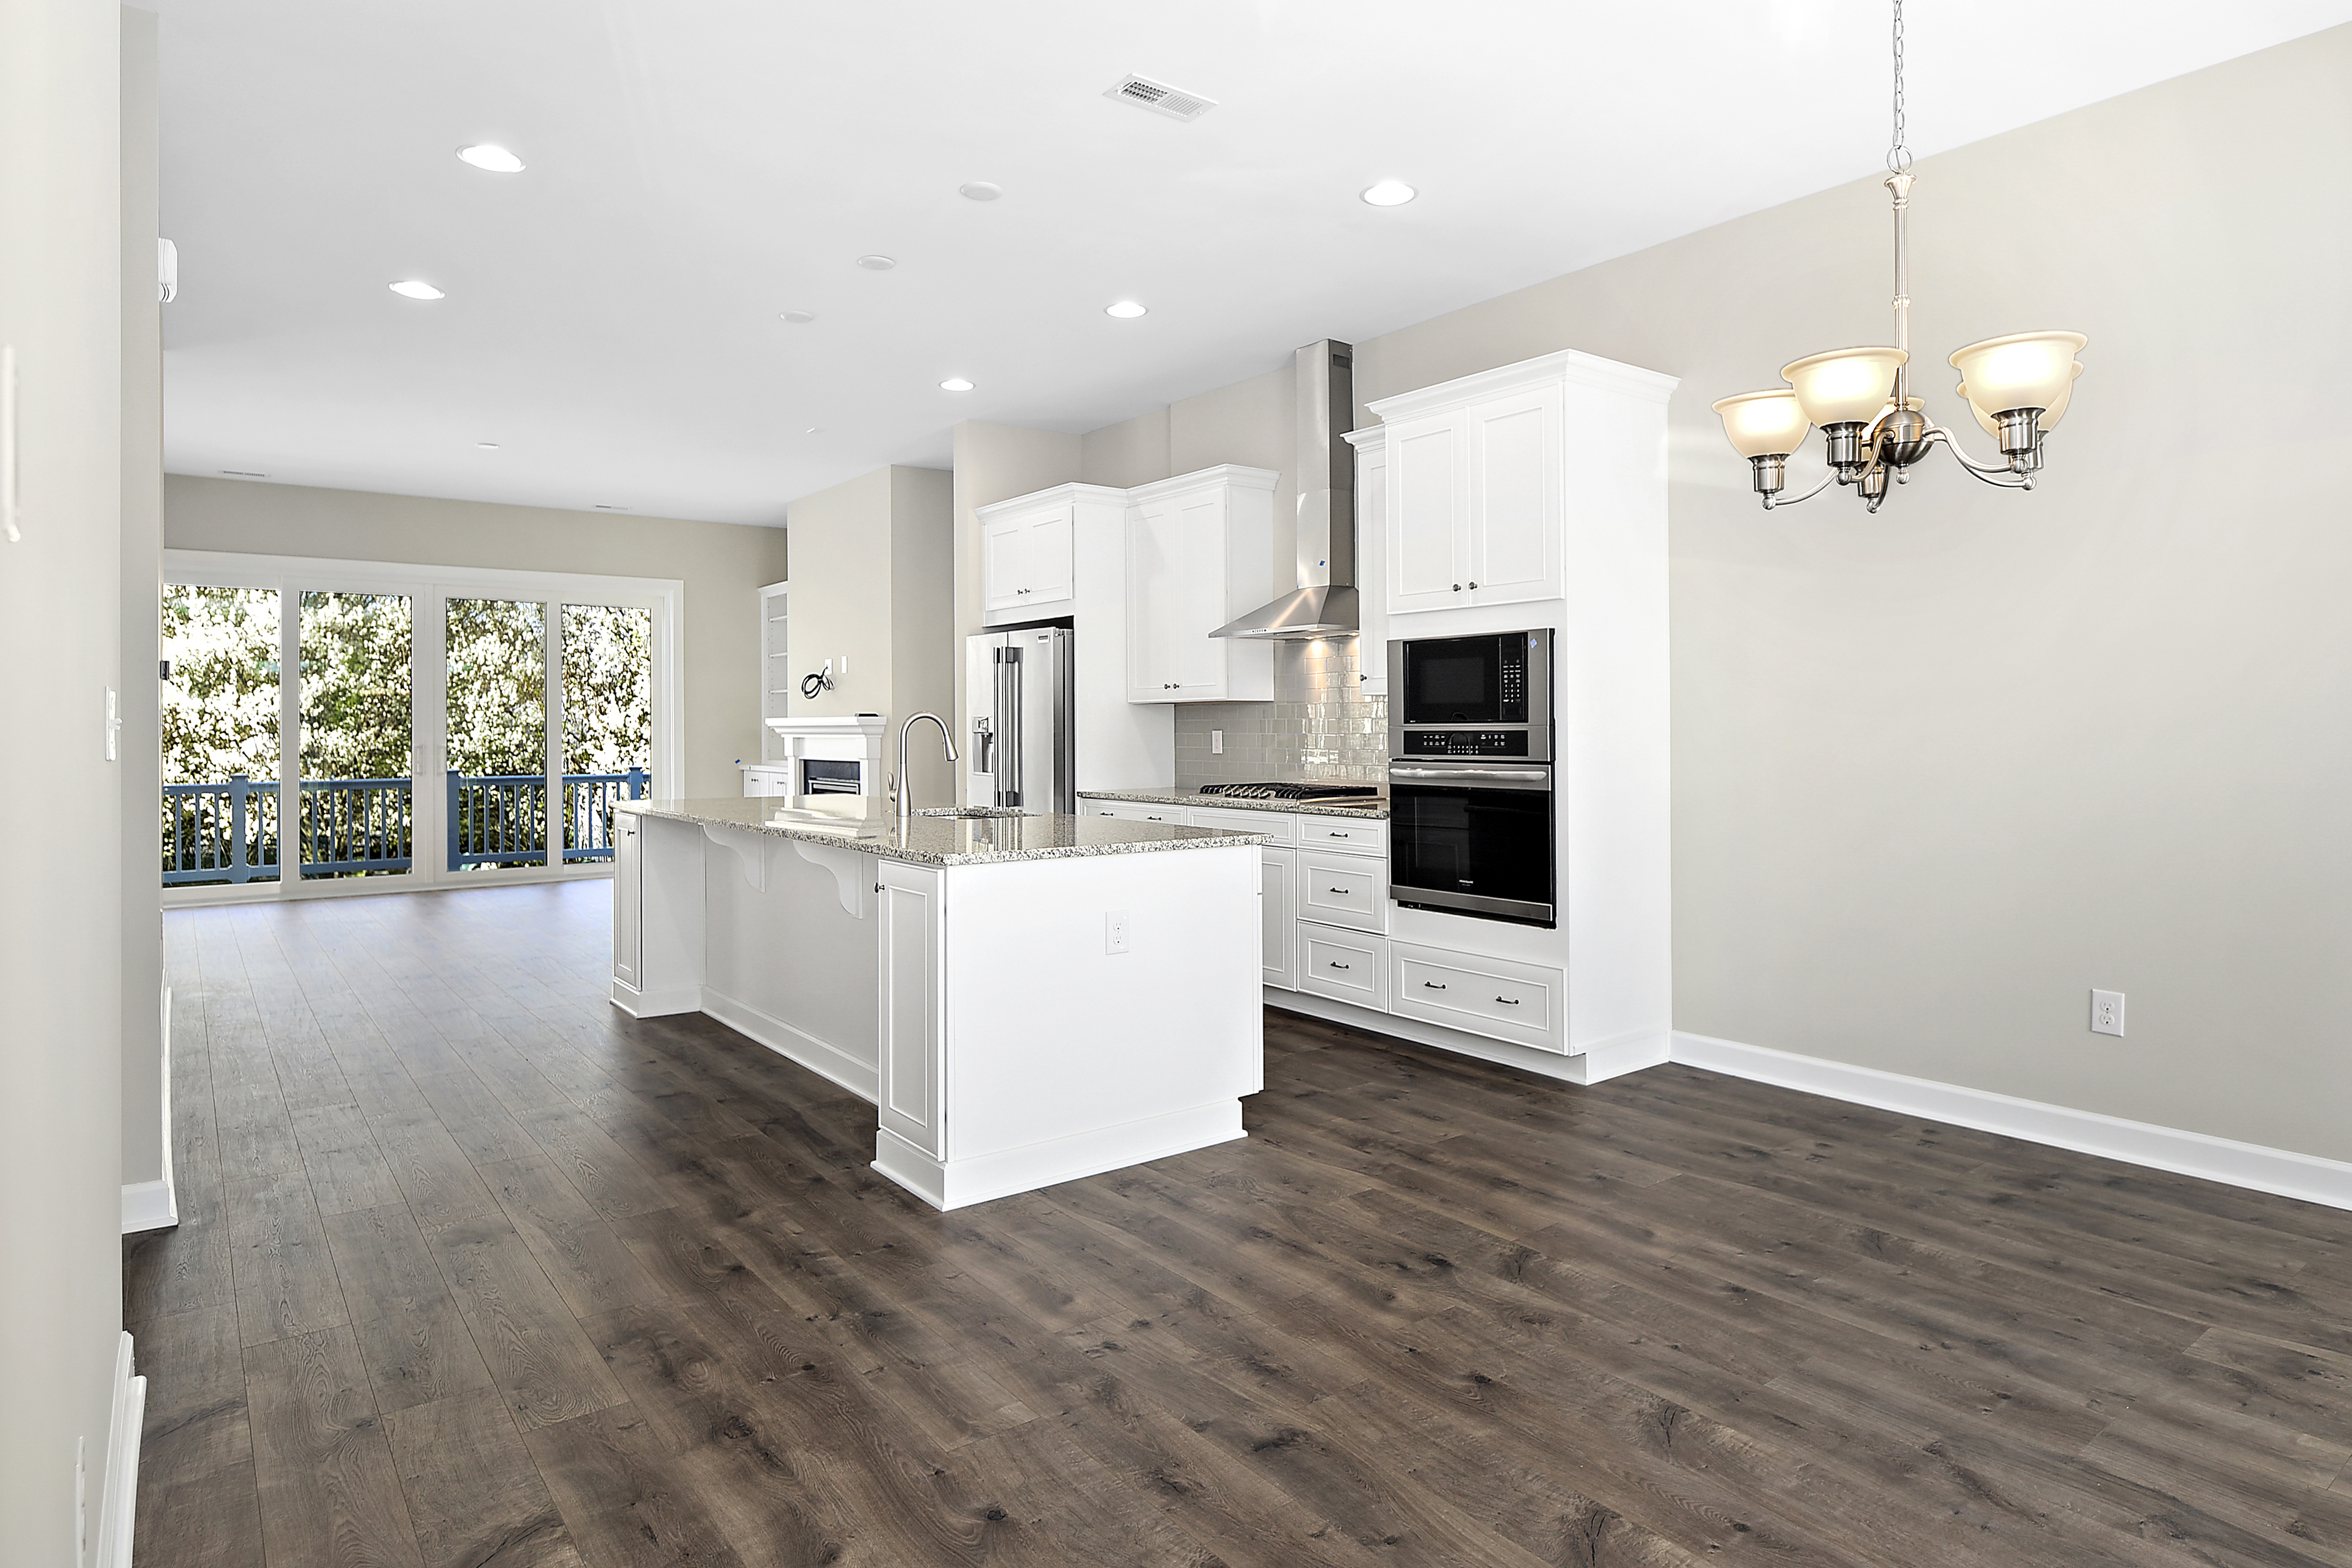 An alternative view of the kitchen and living room area in the Turnstone floorplan